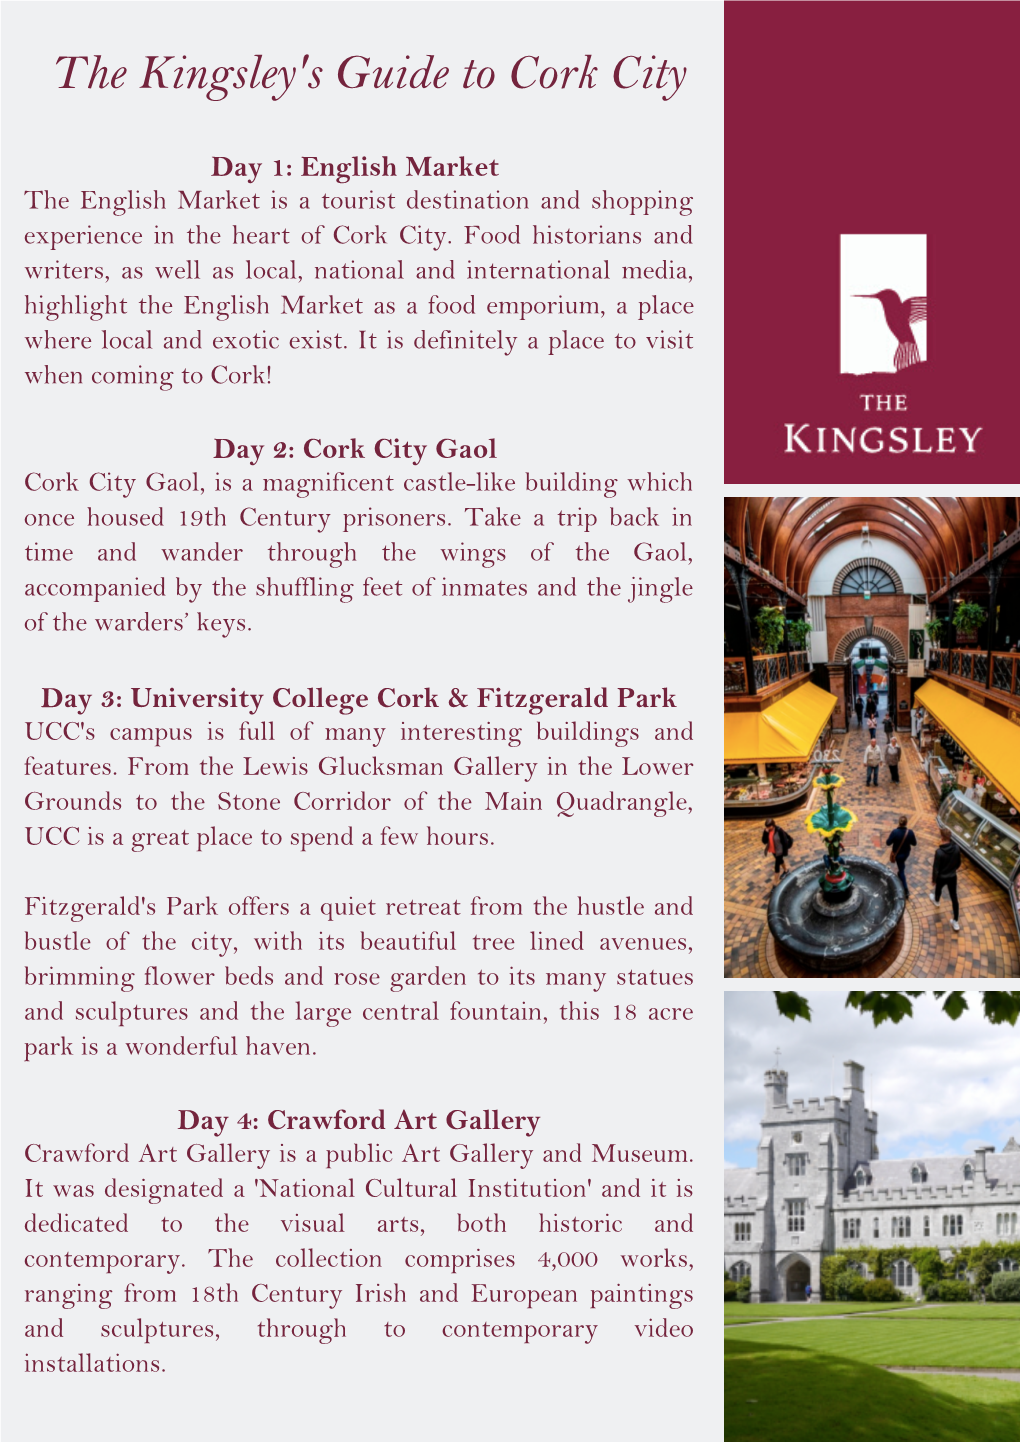 Download the Kingsley's Guide to Cork City